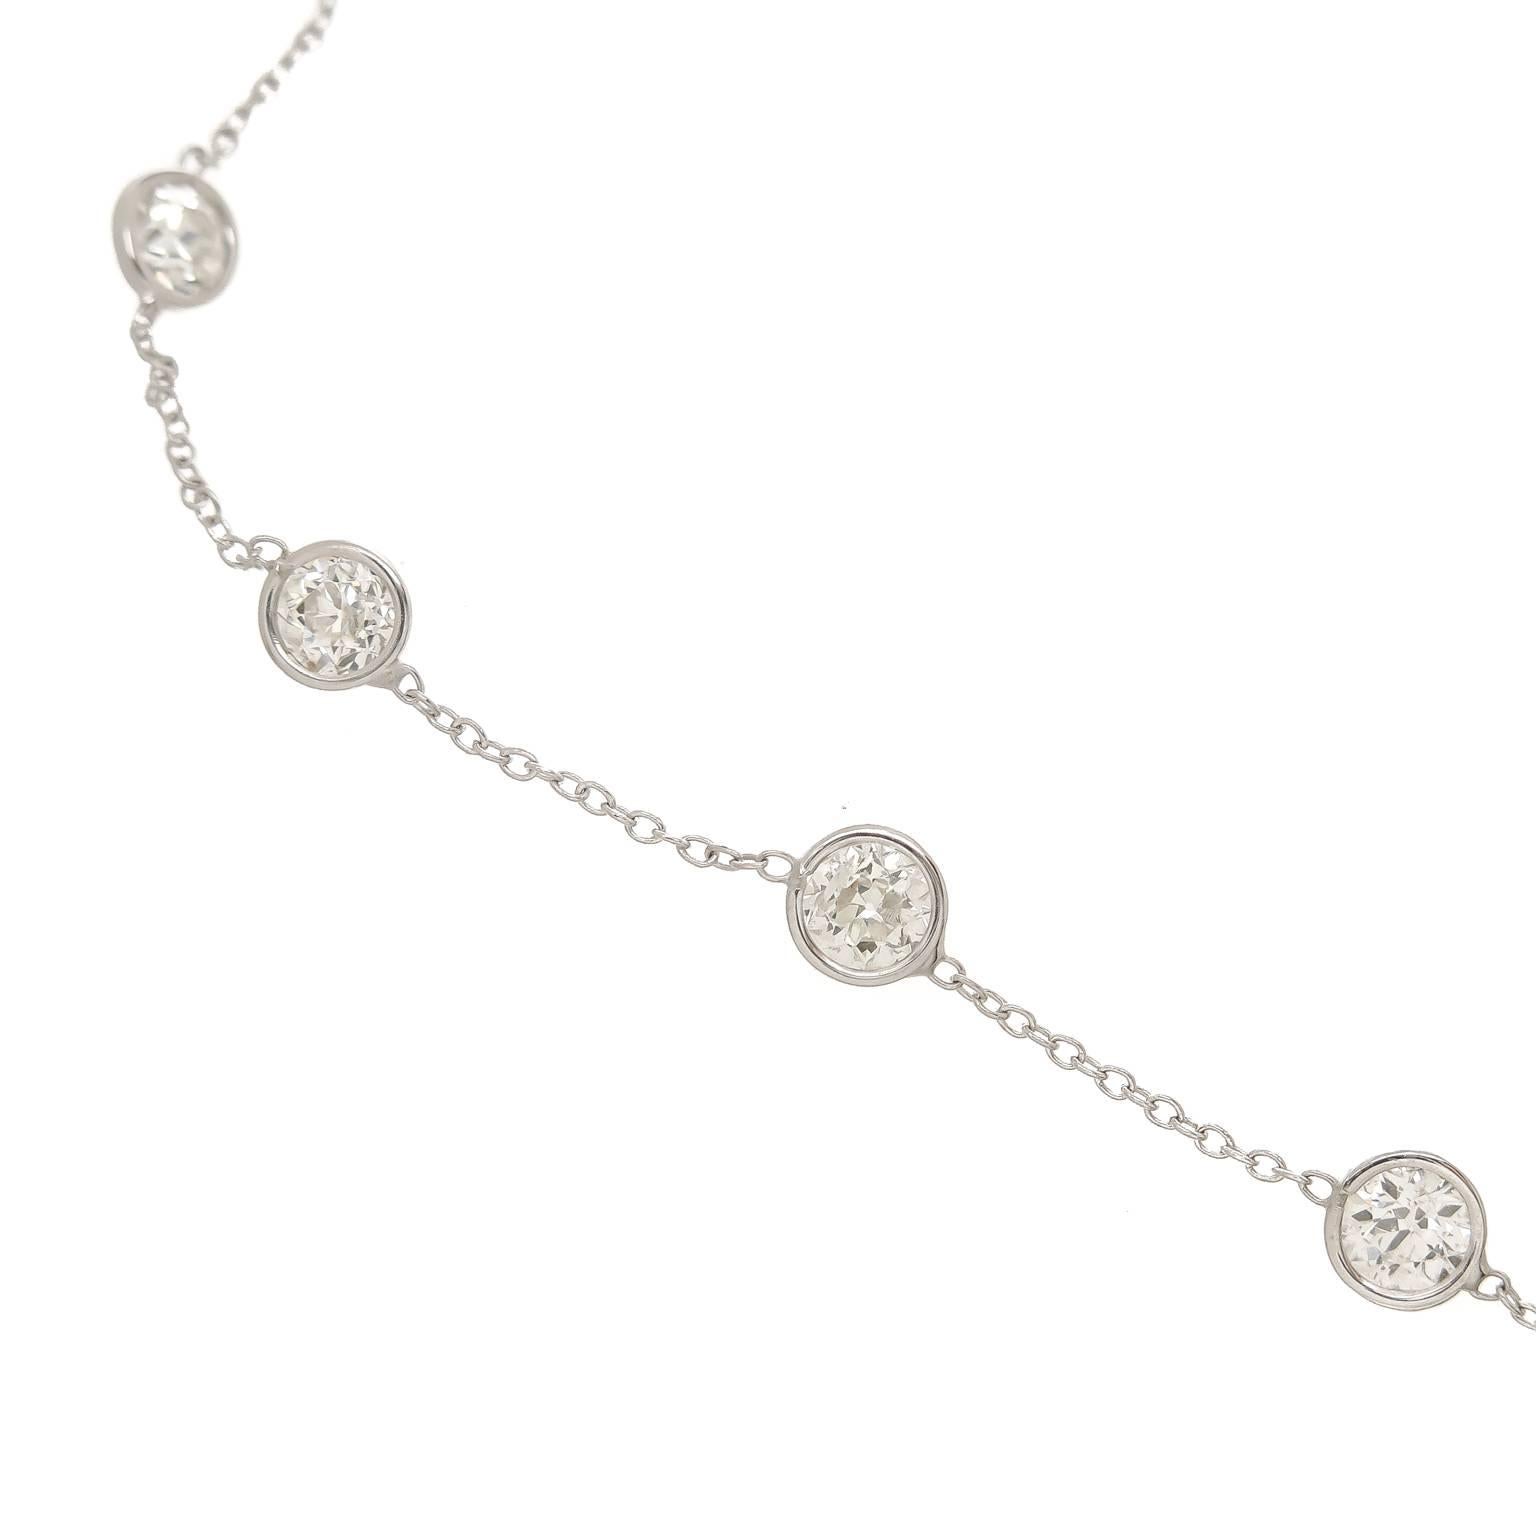 An all Platinum chain necklace set with Old European cut Diamonds, measuring 18 inch in Length the Diamonds are set 5/8 inch apart and Graduate in size from smaller to larger in the front with the larger front stones being 1/2 Carat each. Total